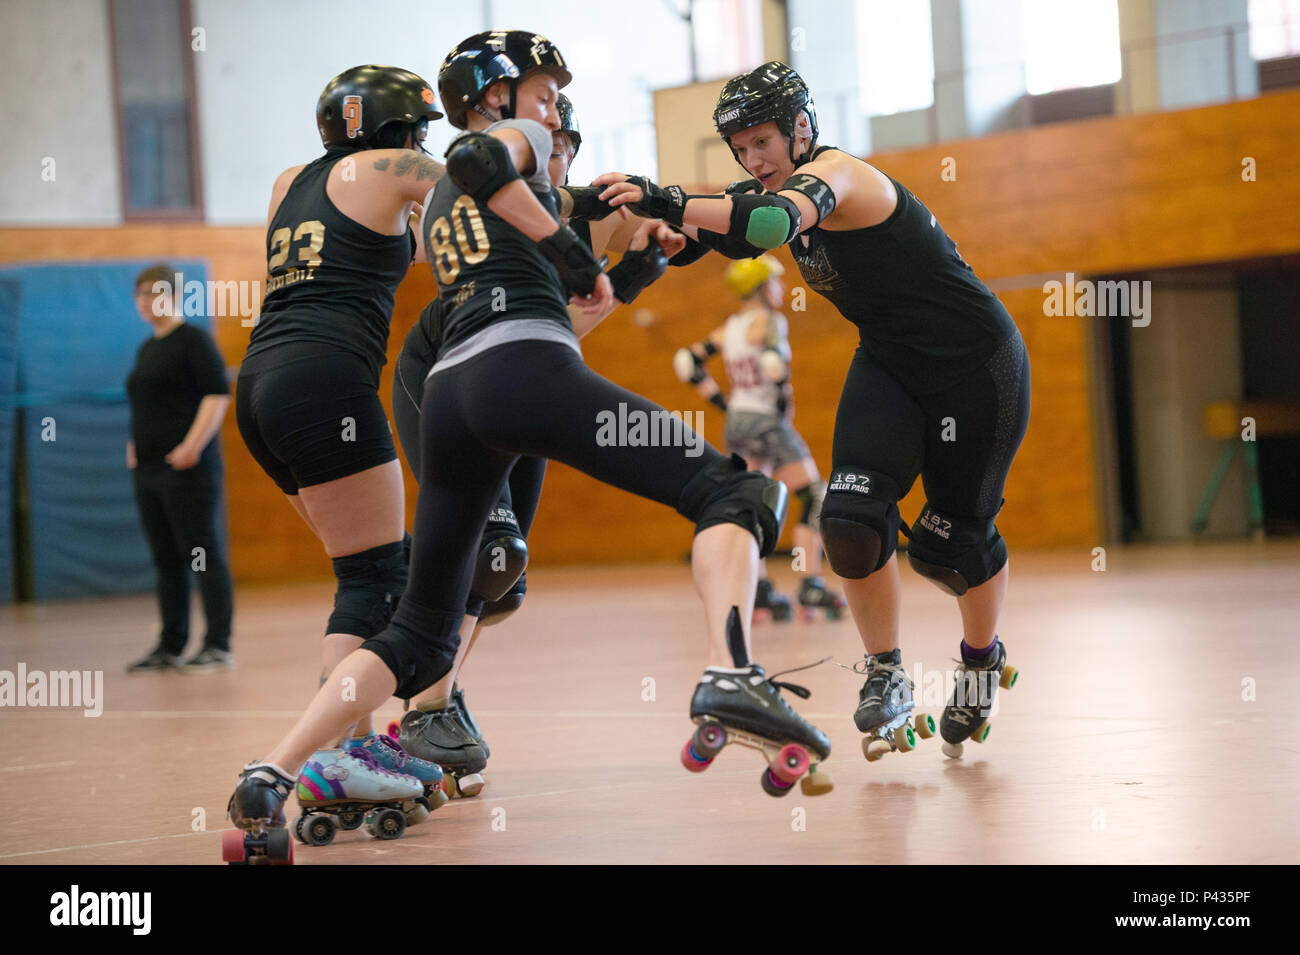 Potsdam, Germany. 24th Apr, 2018. Susanne Eckler (r), sometimes nicknamed  Christie Huckevoll or Hooks, trains with her team, the Bear City Roller  Derby. Roller derby involves full body contact on roller skates